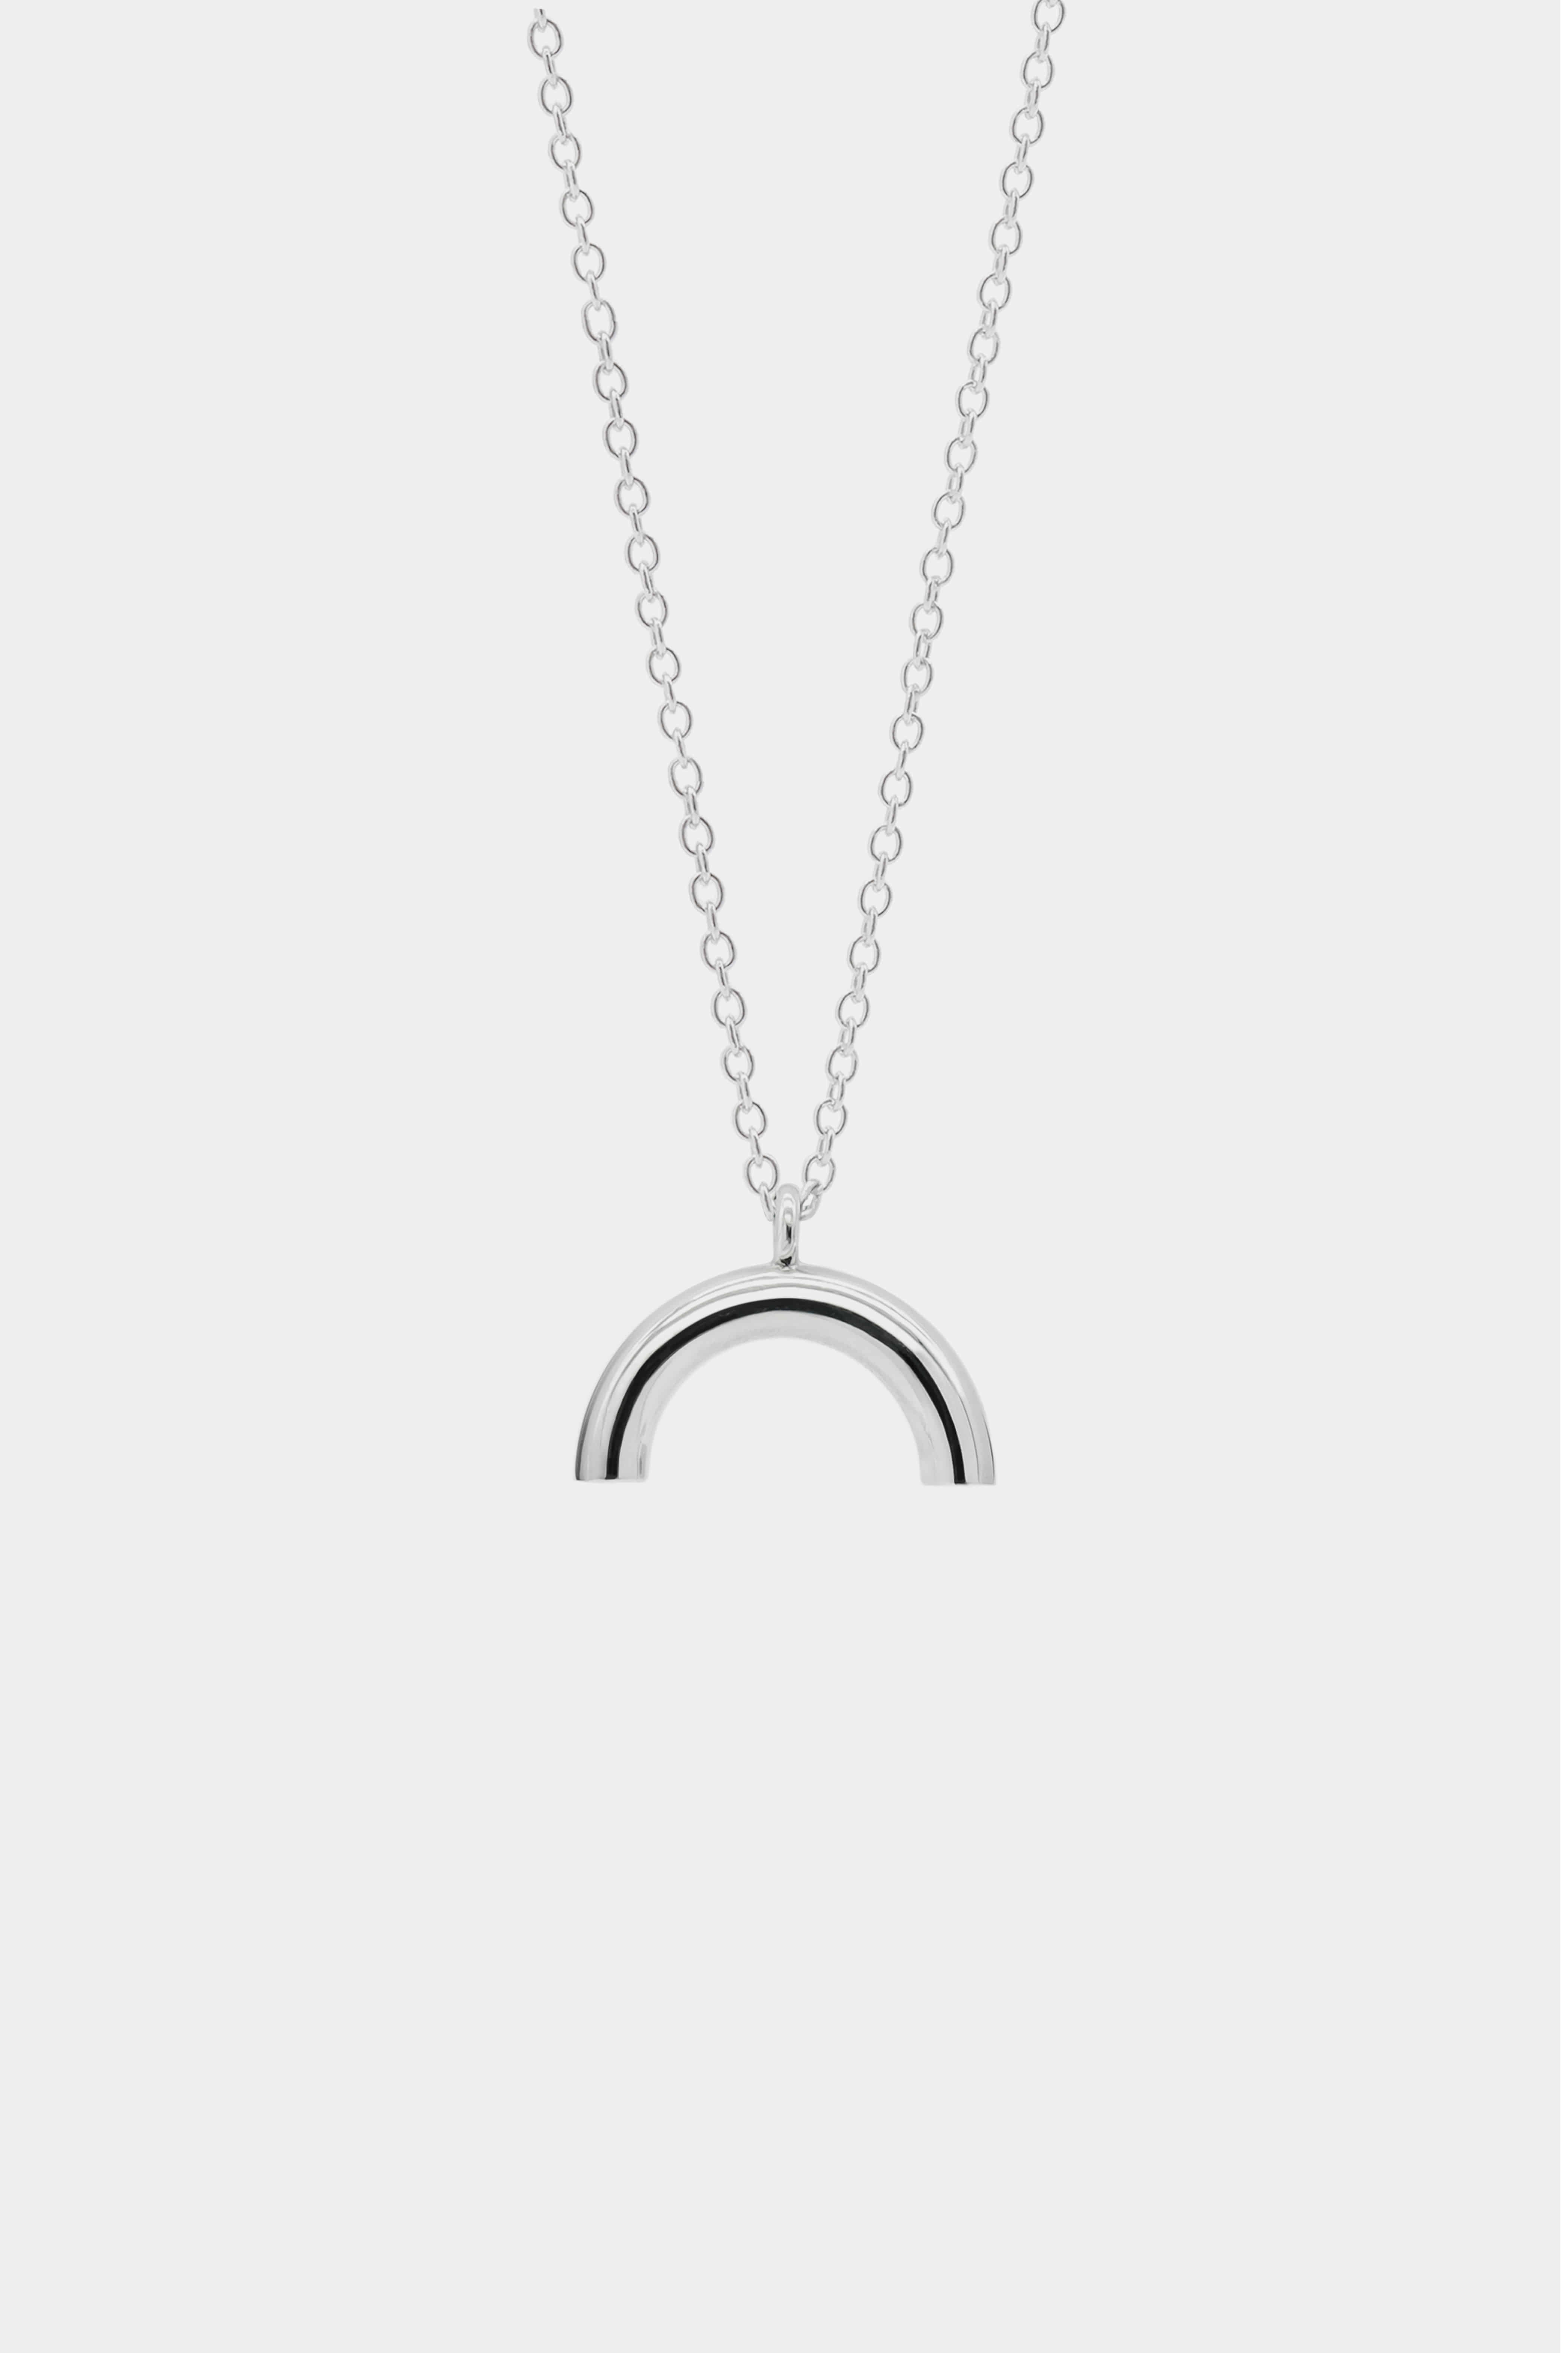 U pipe necklace - looped